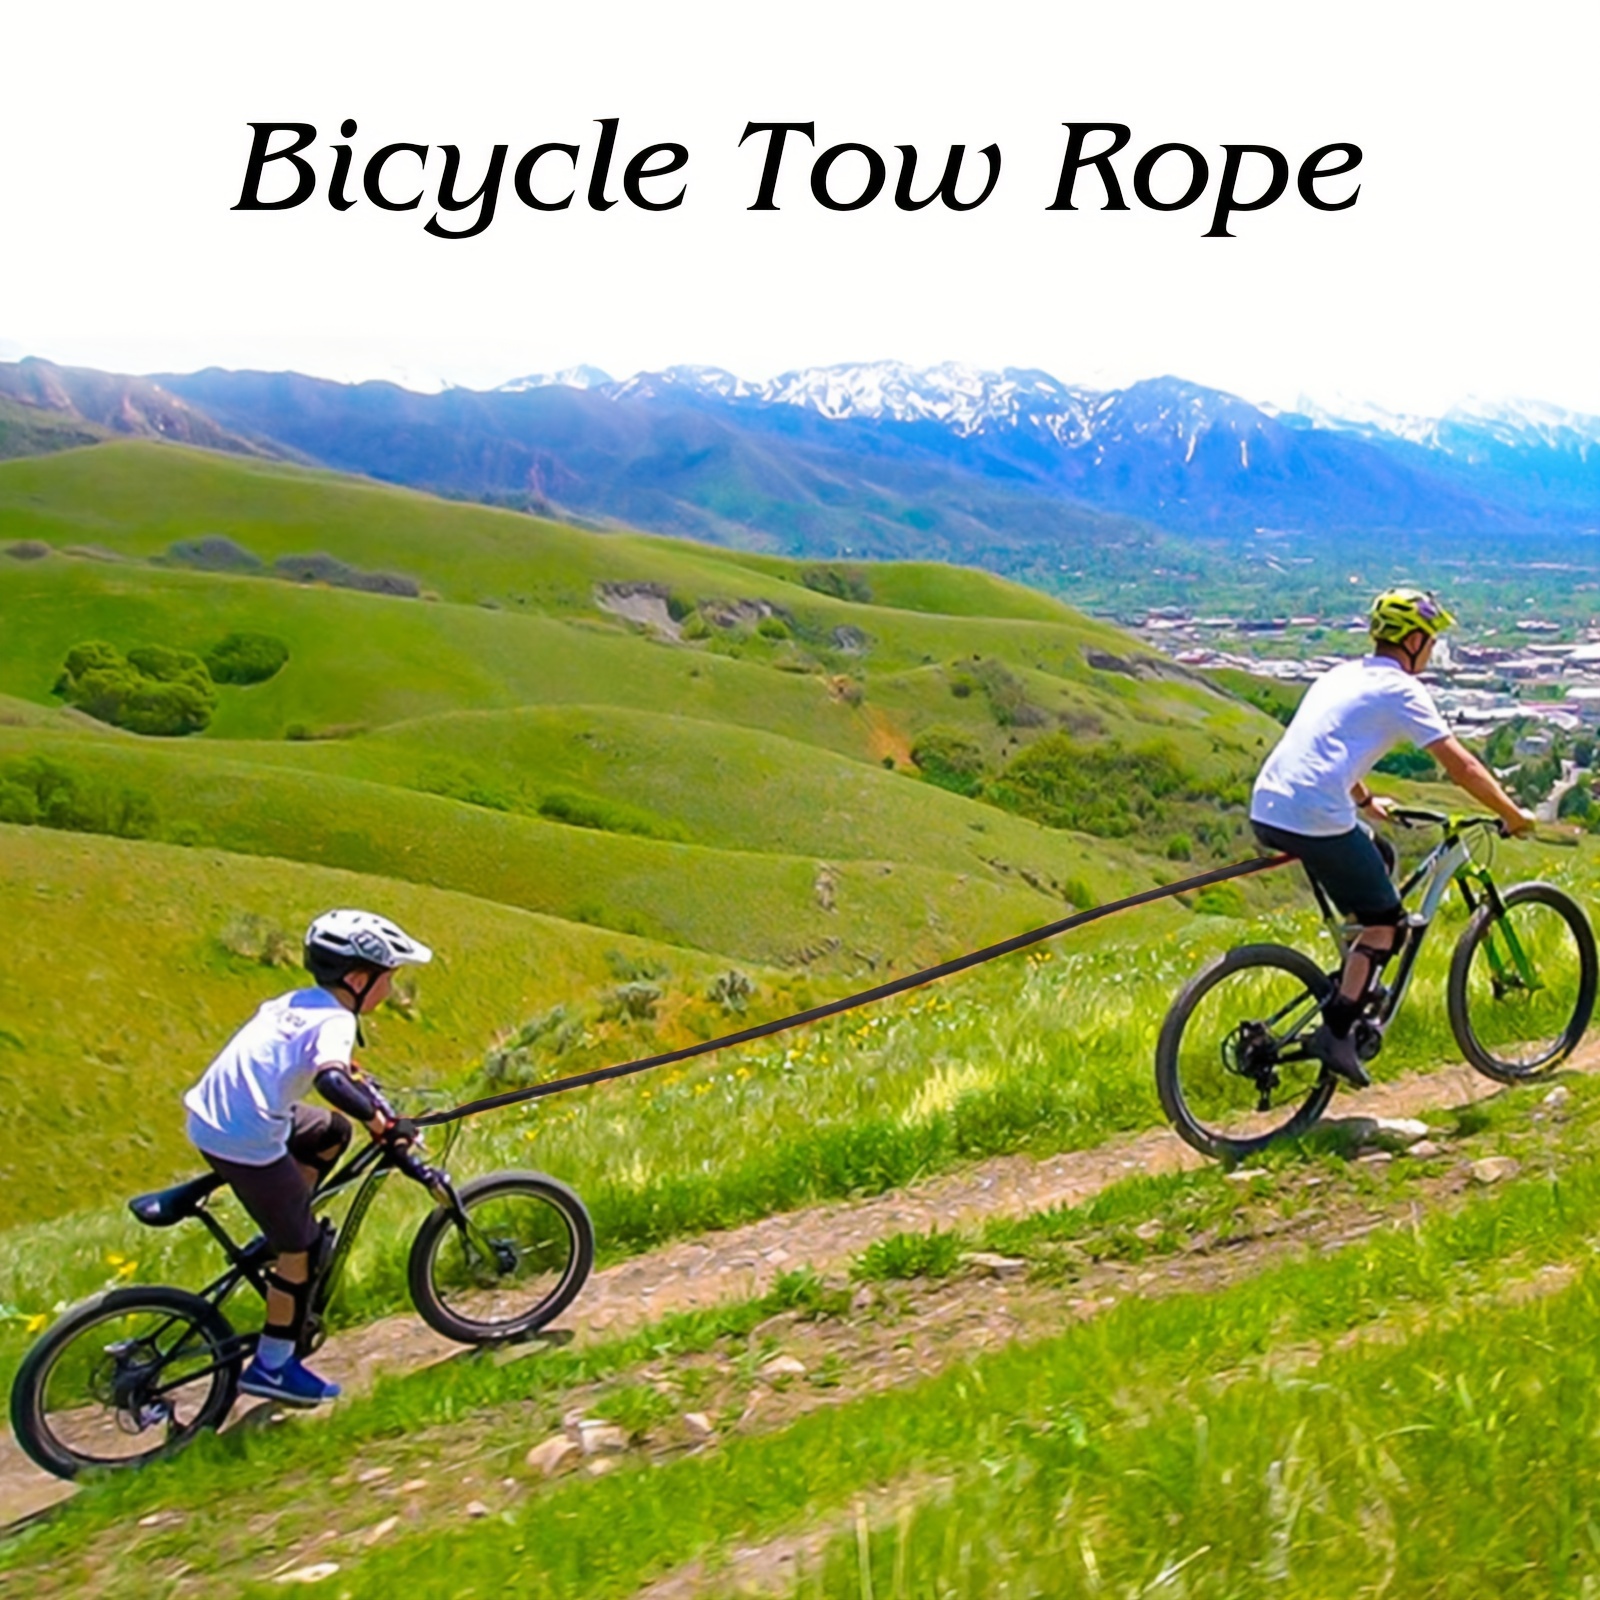 Tow Rope Retractable Traction Rope for Riding Biking Outdoor